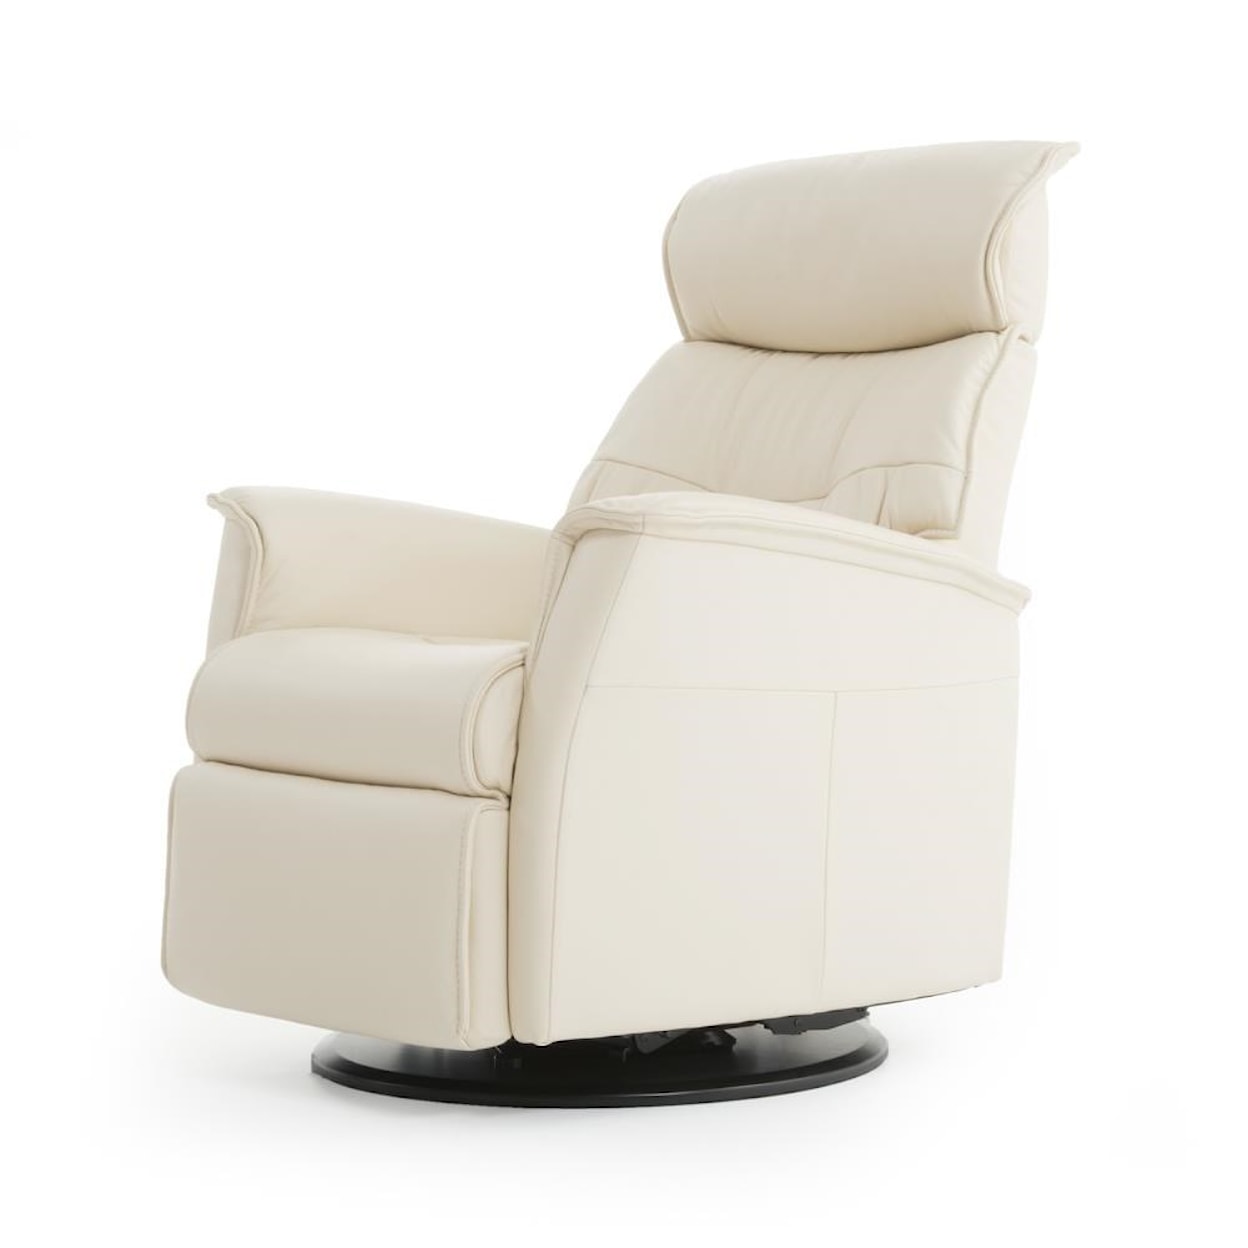 IMG Norway Captain Standard Recliner with Chaise